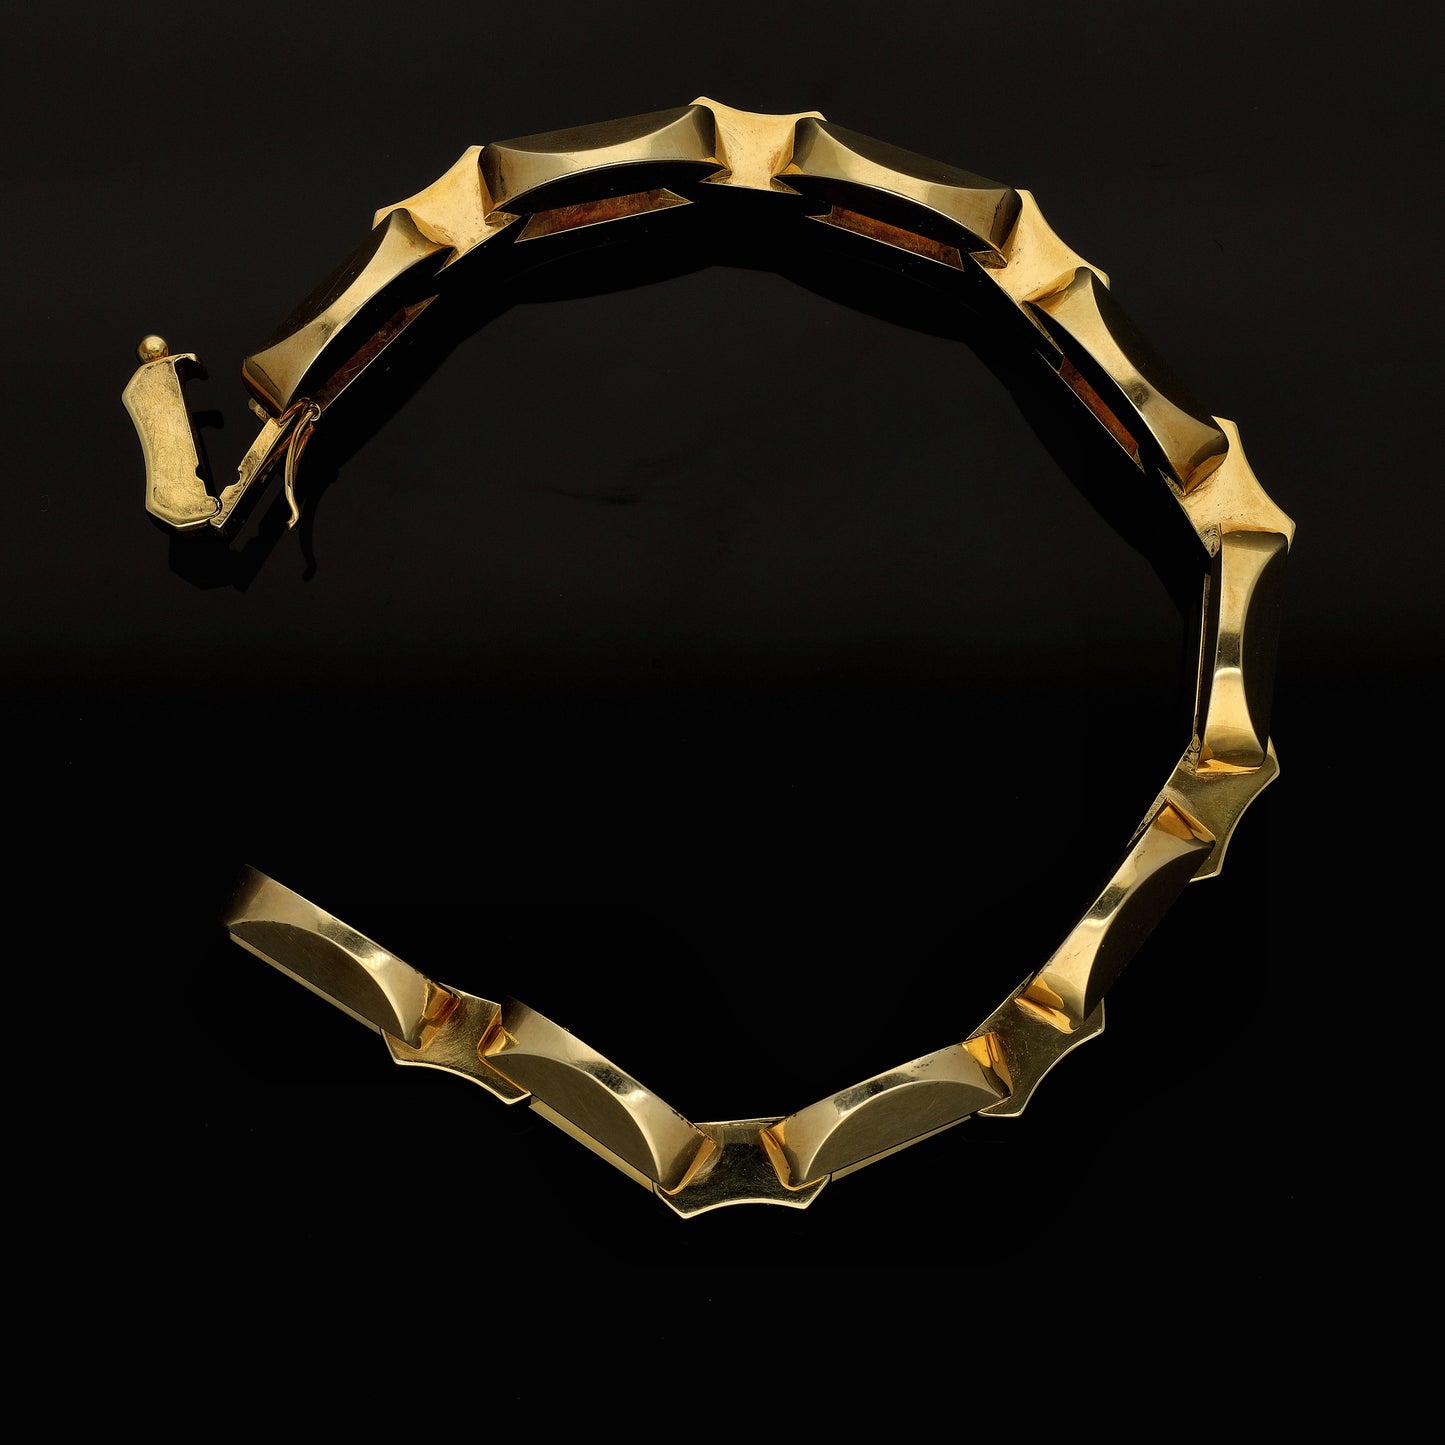 A perfect daily Art Deco statement chain link bracelet, this solid 14k gold vintage bracelet is to die for!  Beuatiful geometric bracelet with a heavy and nice-feel body of a bit over 35 grams!